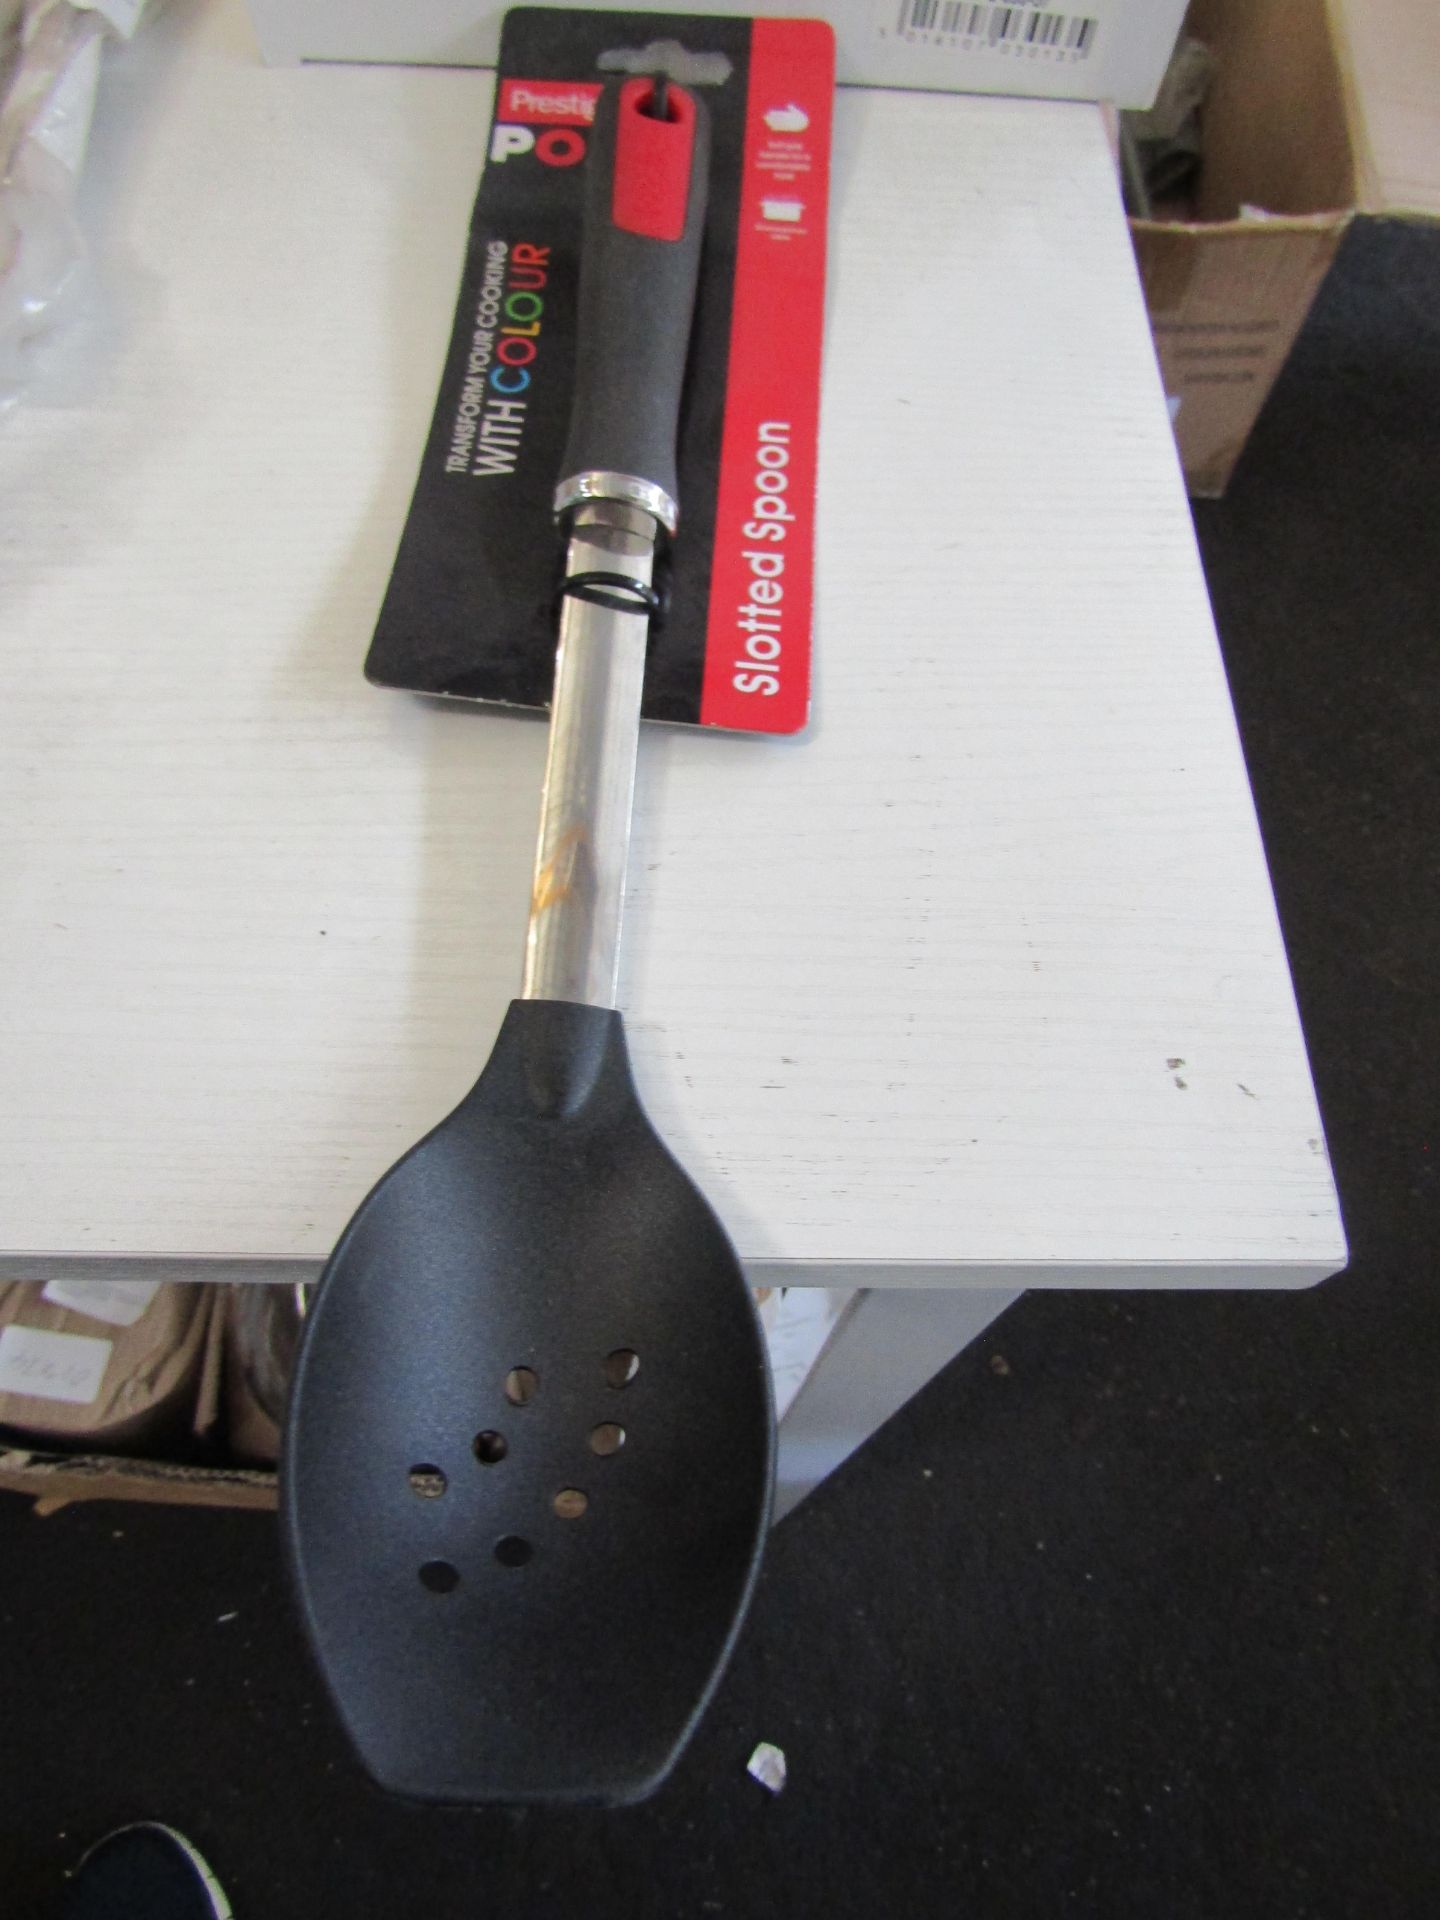 Prestige Pop Slotted Spoon Black/Red RRP 05About the Product(s)The Pop Slotted Spoon by Prestige - Image 2 of 2